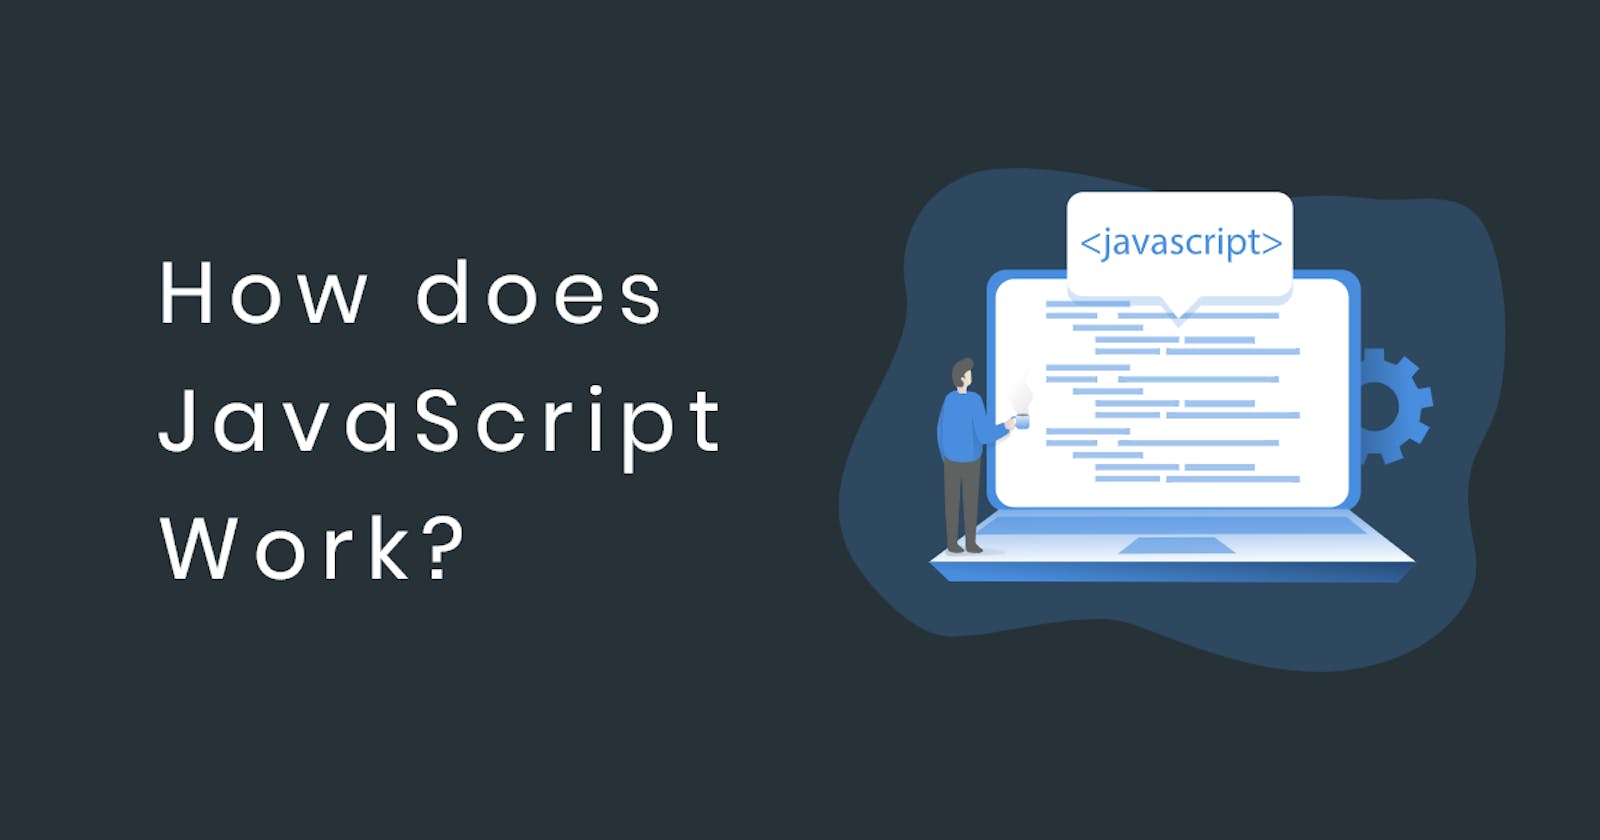 How does JavaScript work?